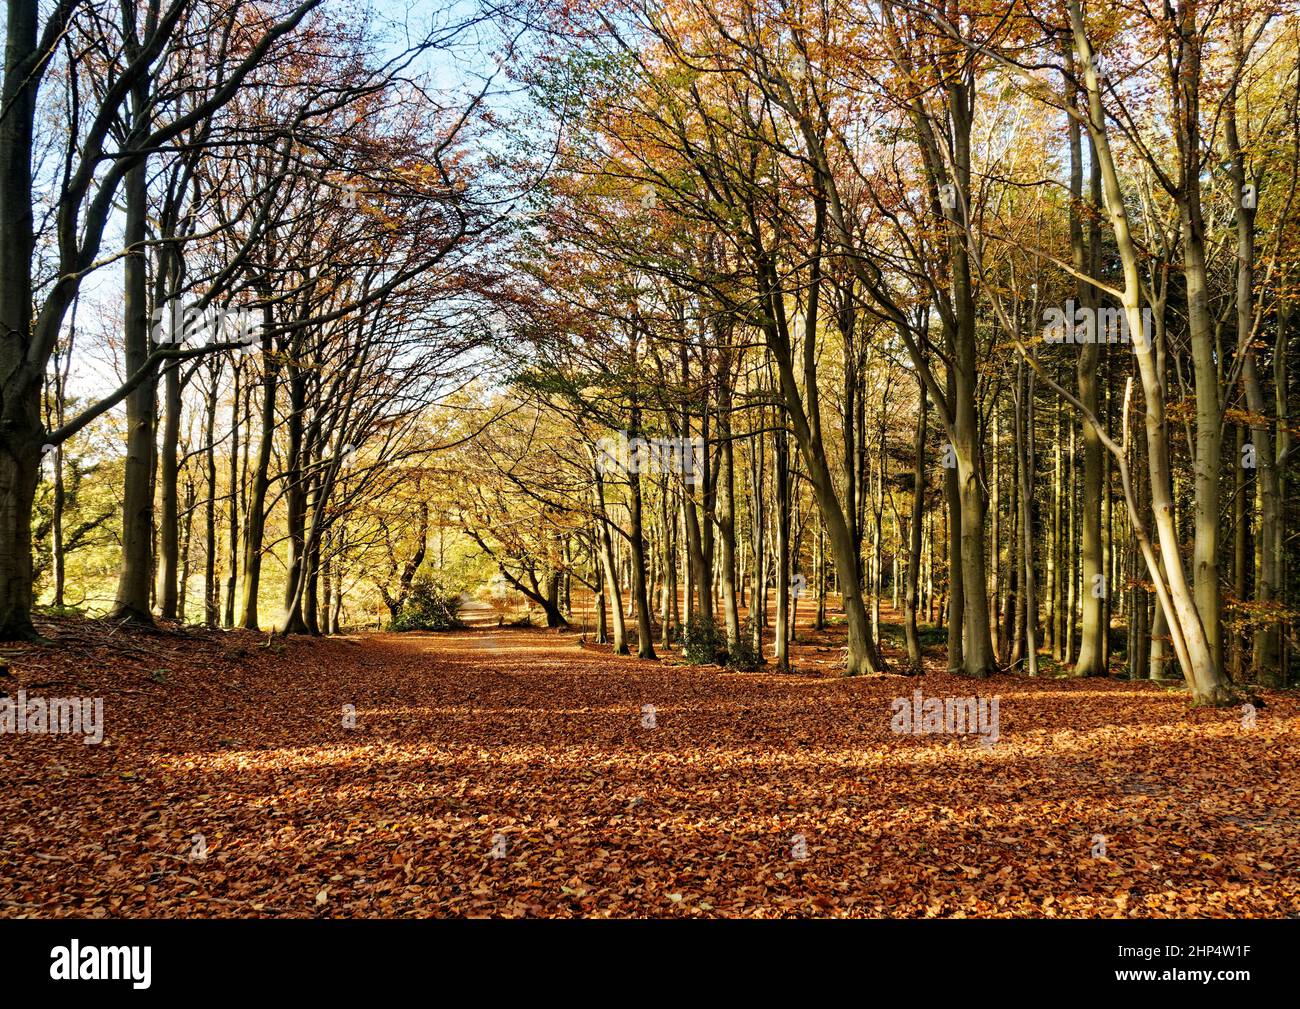 Beech trees in autumn sunshine providing glowing Fall colours in Witton Woods (sometimes called Bacton Woods) near North Walsham, Norfolk. Stock Photo